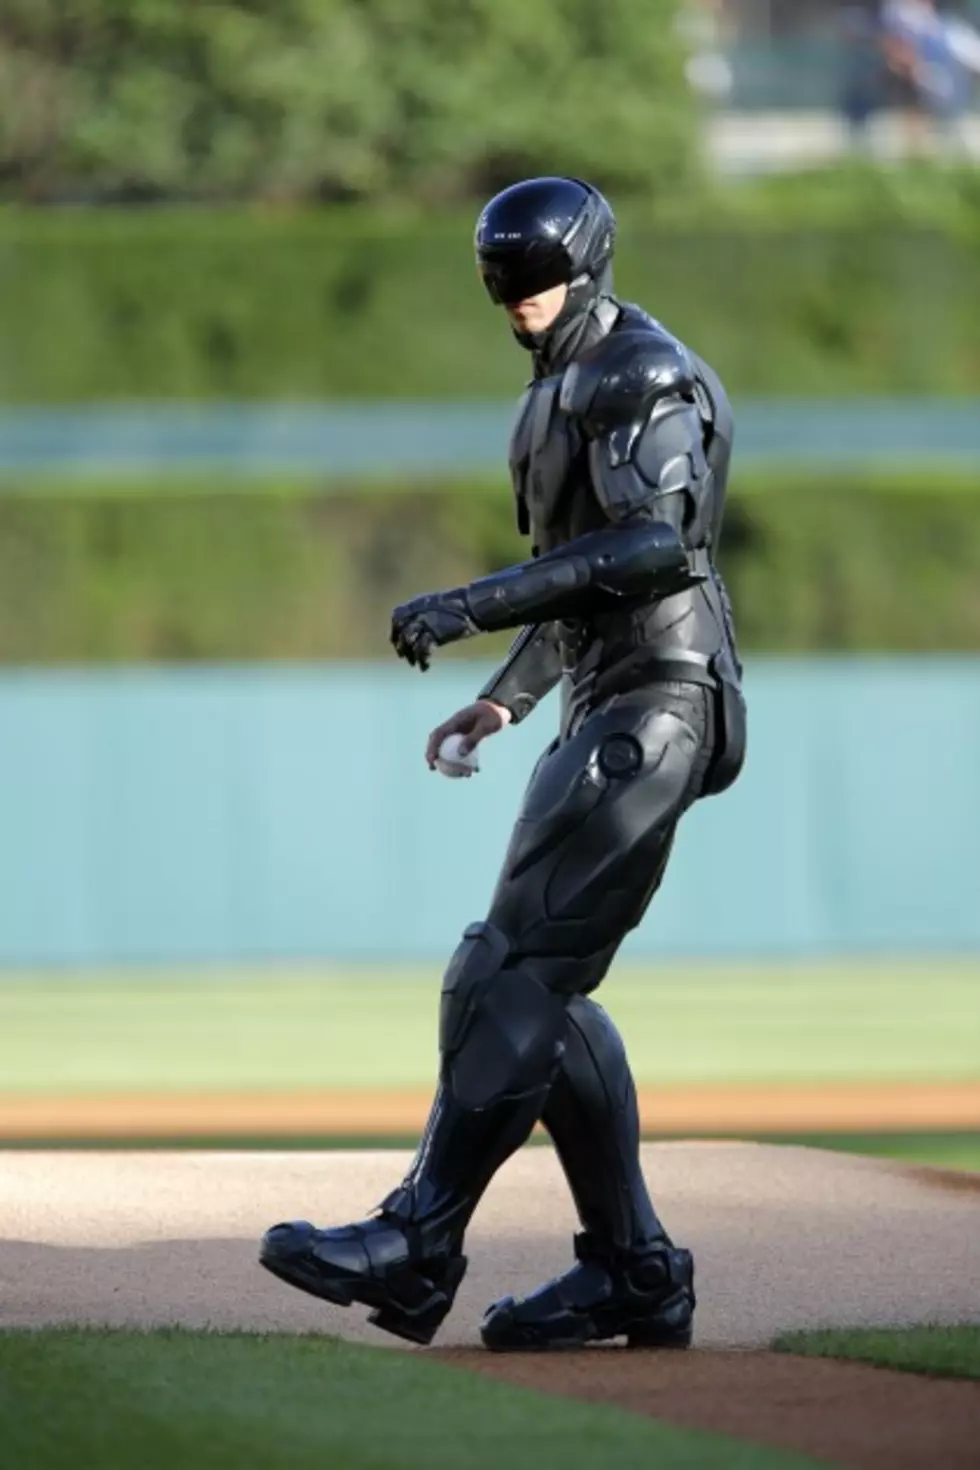 Robocop Throws Out First Pitch at Detroit Tigers Game [Video]